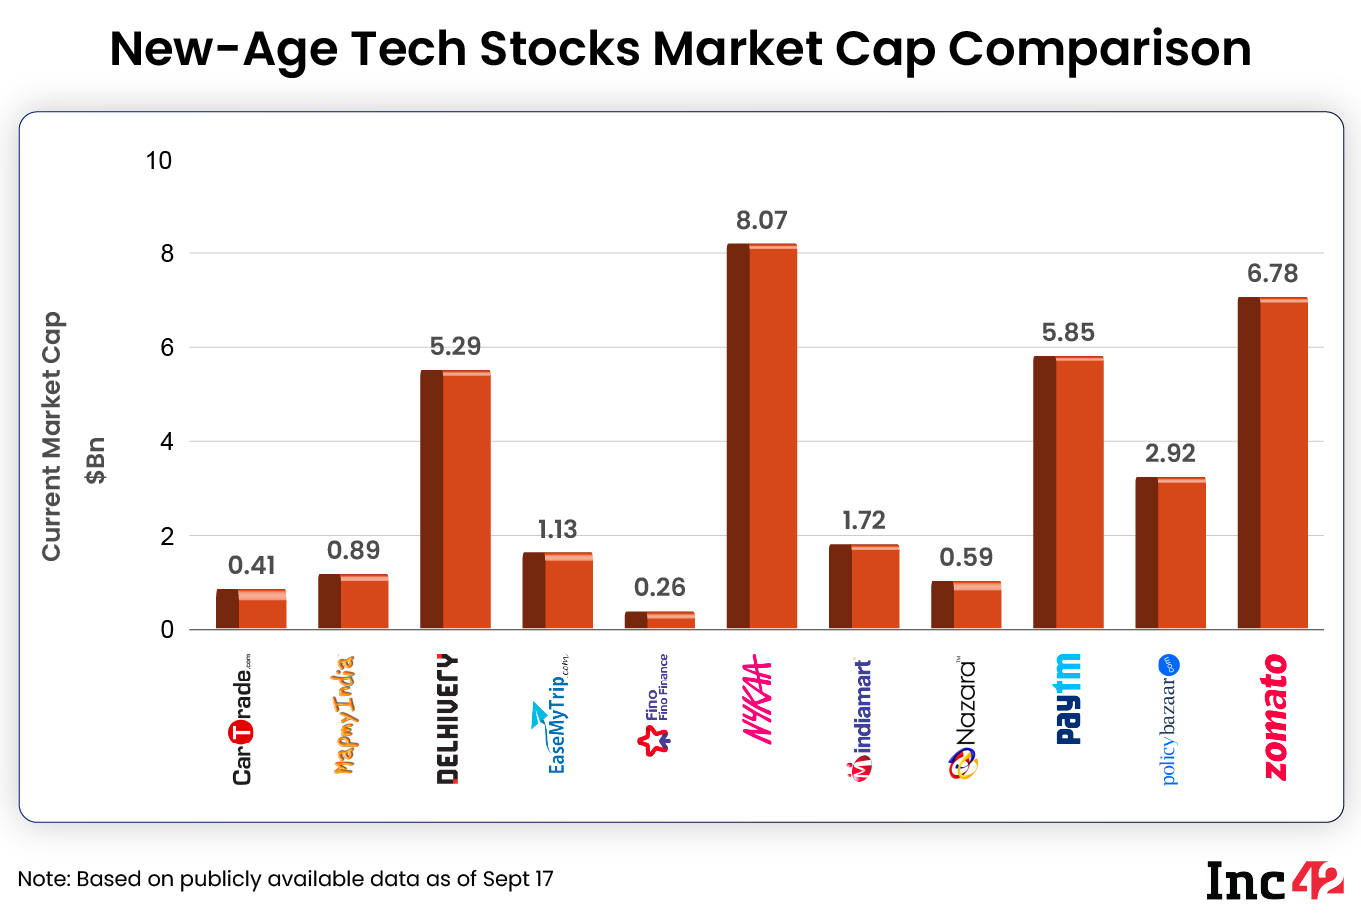  Despite the overall volatility, the 11 new-age tech stocks ended the week with a combined market cap of around $33.91 Bn as against $33.79 Bn last week.